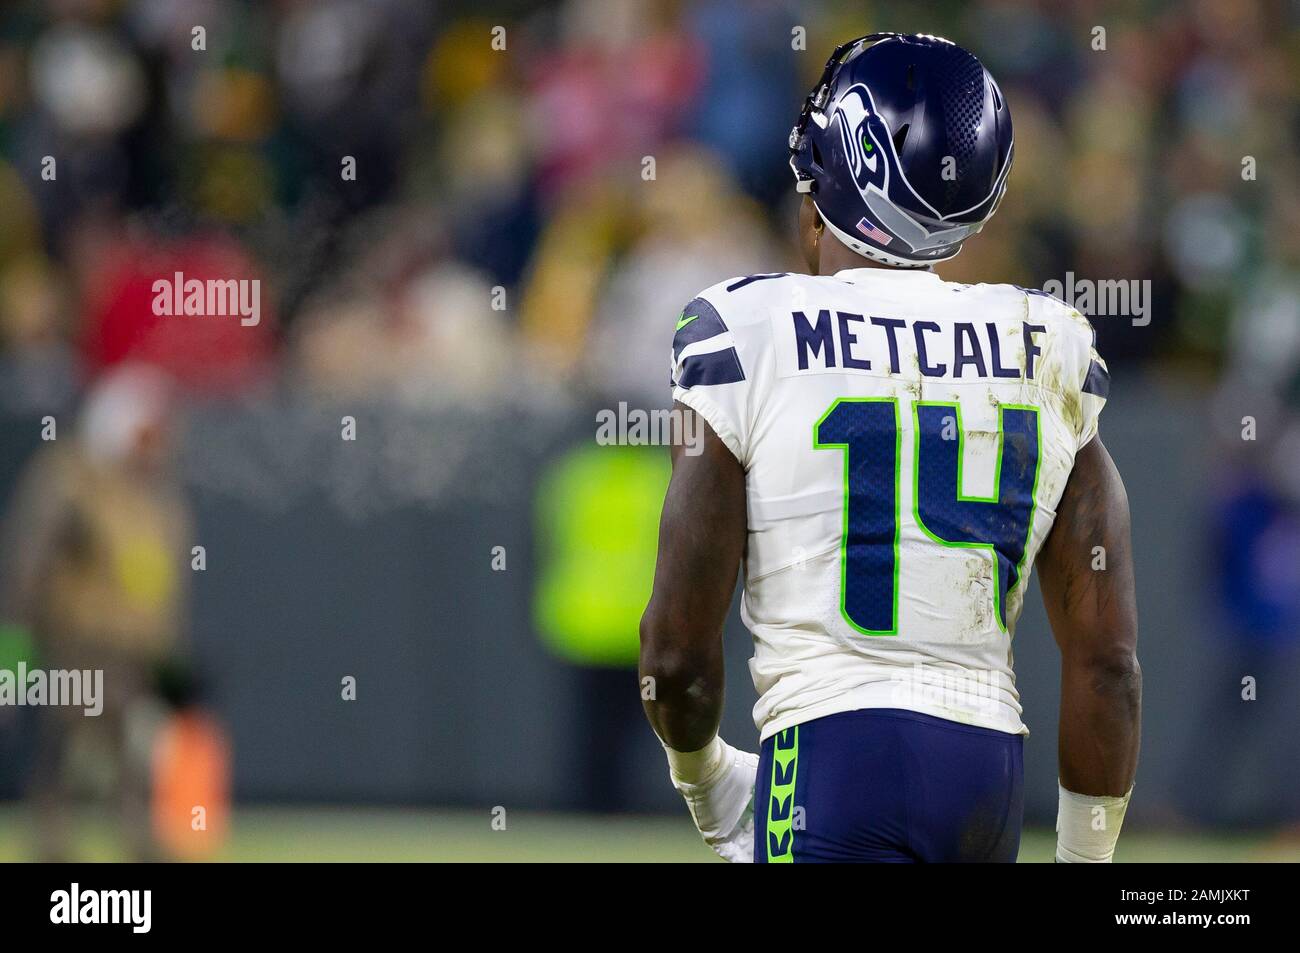 January 12, 2020: Seattle Seahawks wide receiver D.K. Metcalf #14 walks off  the field at halftime of the NFL Football game between the Seattle Seahawks  and the Green Bay Packers at Lambeau